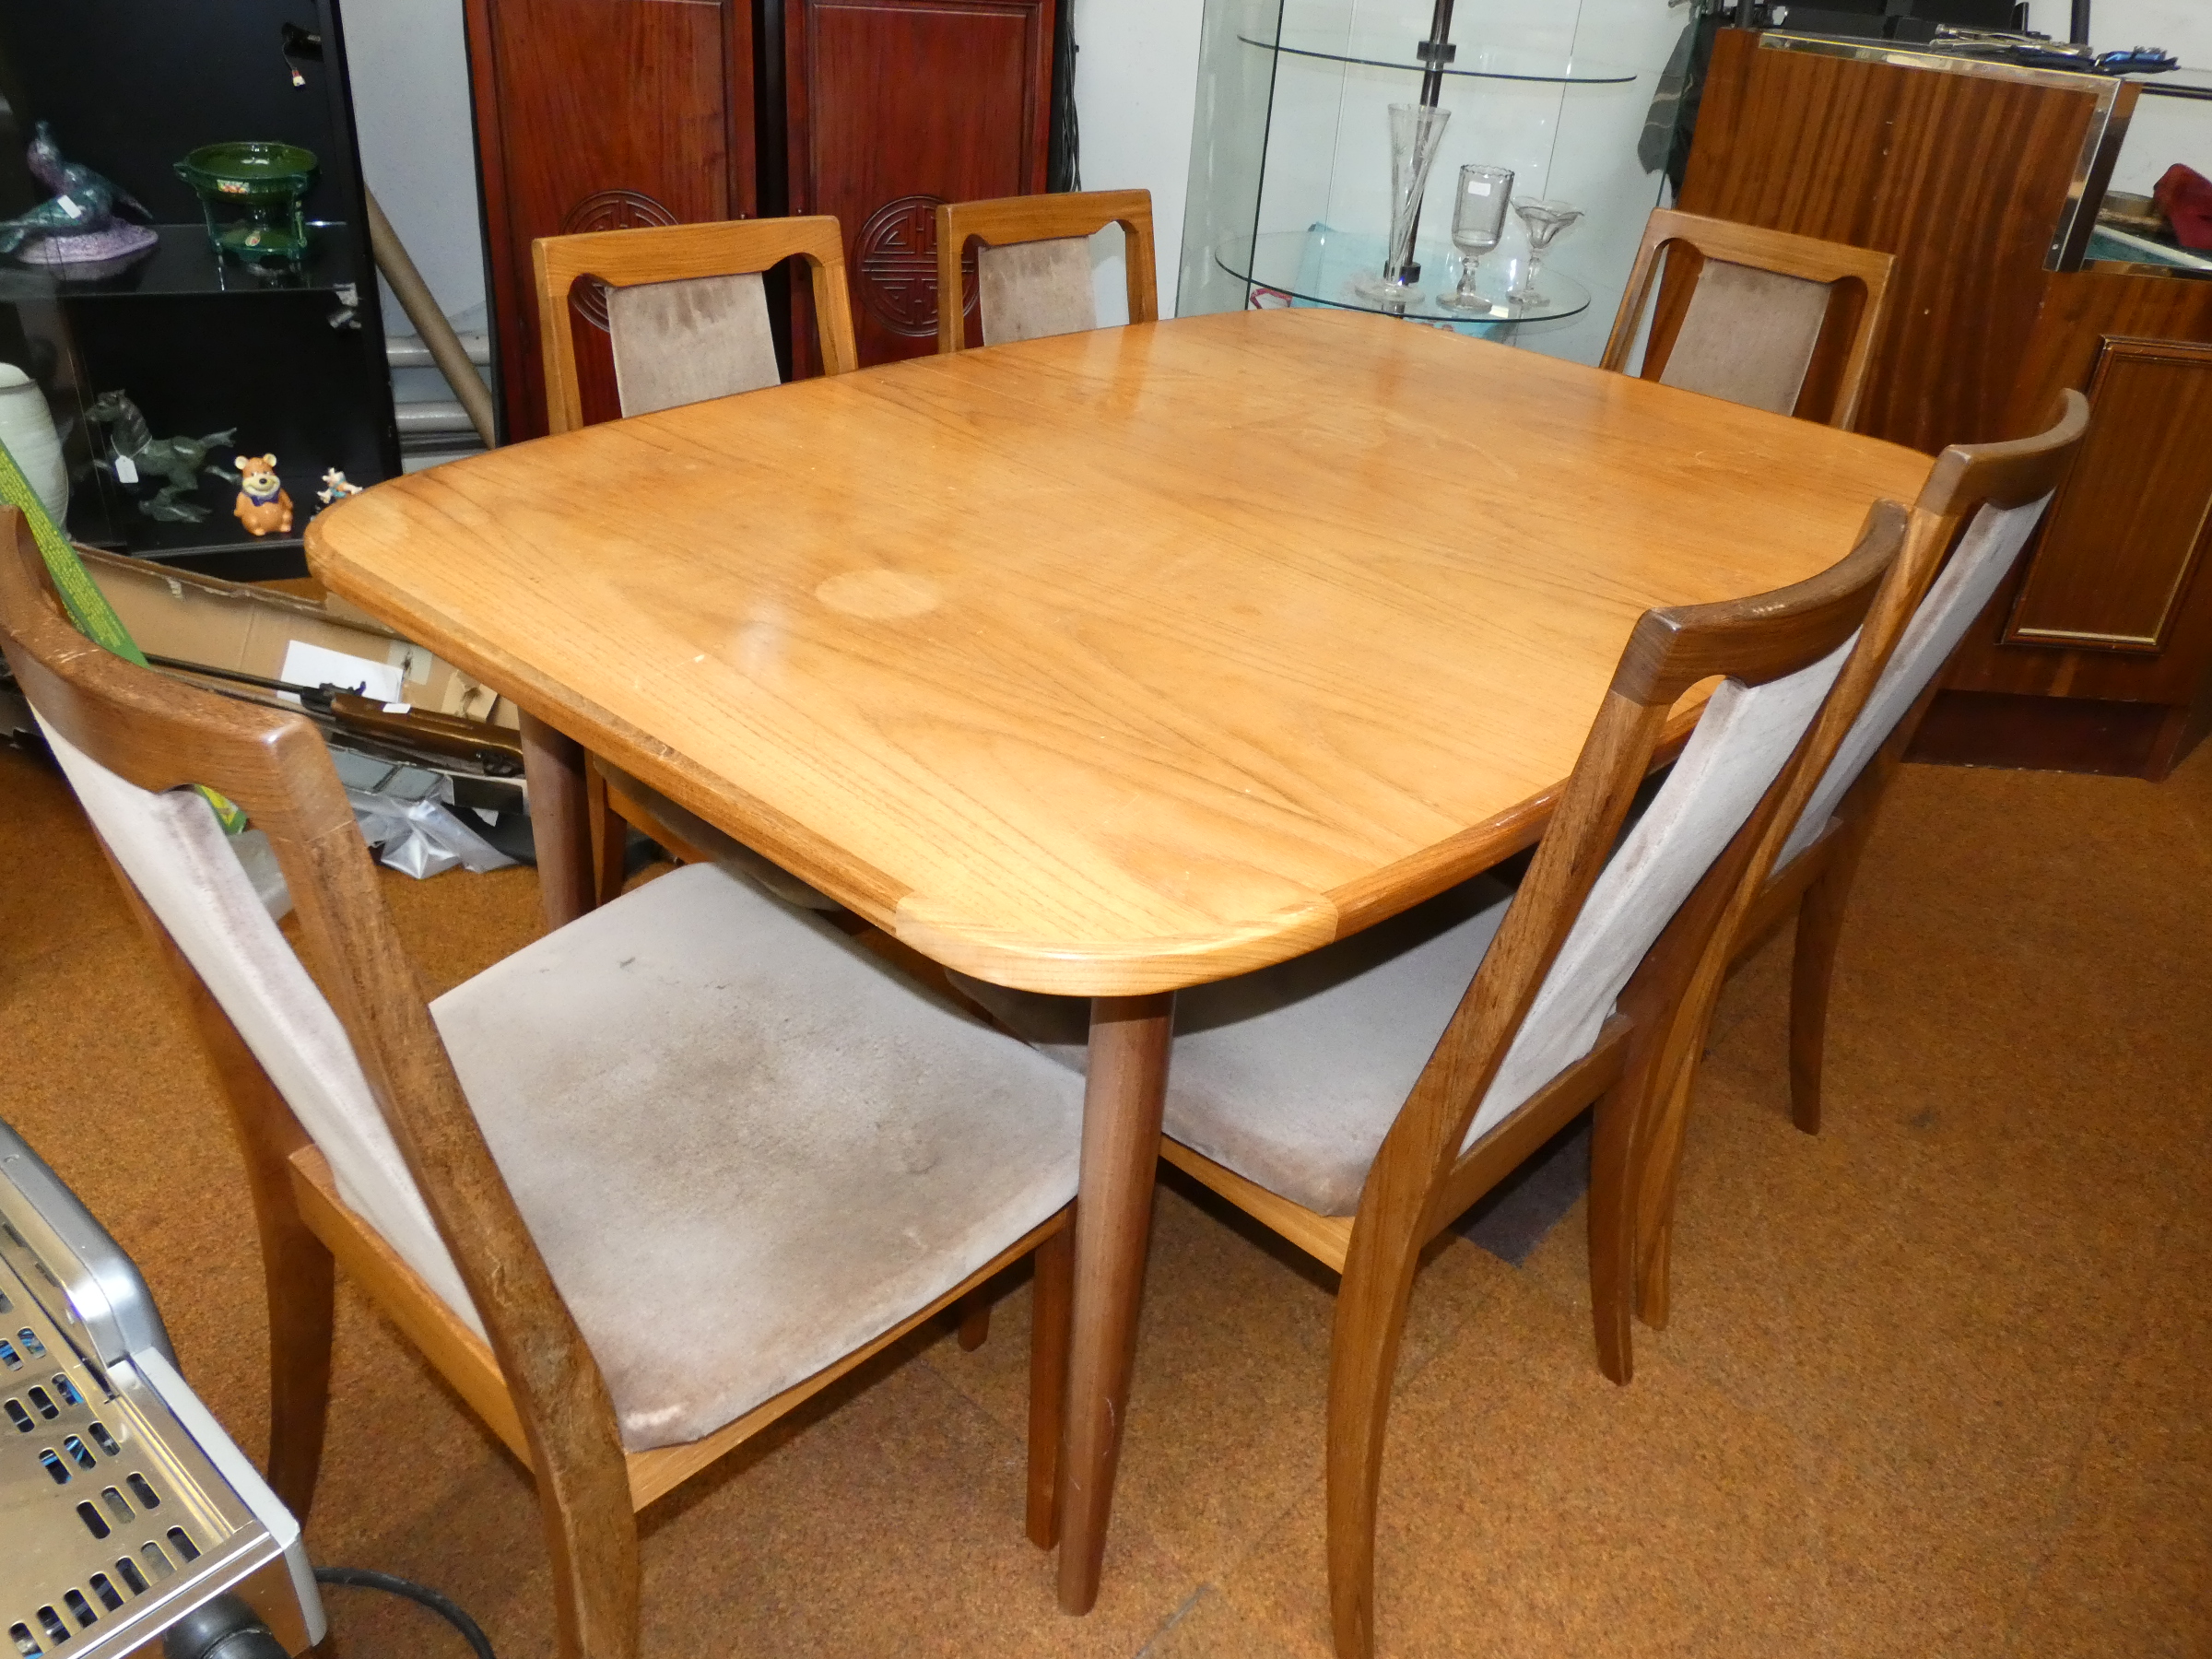 G Plan extending table with 6 chairs